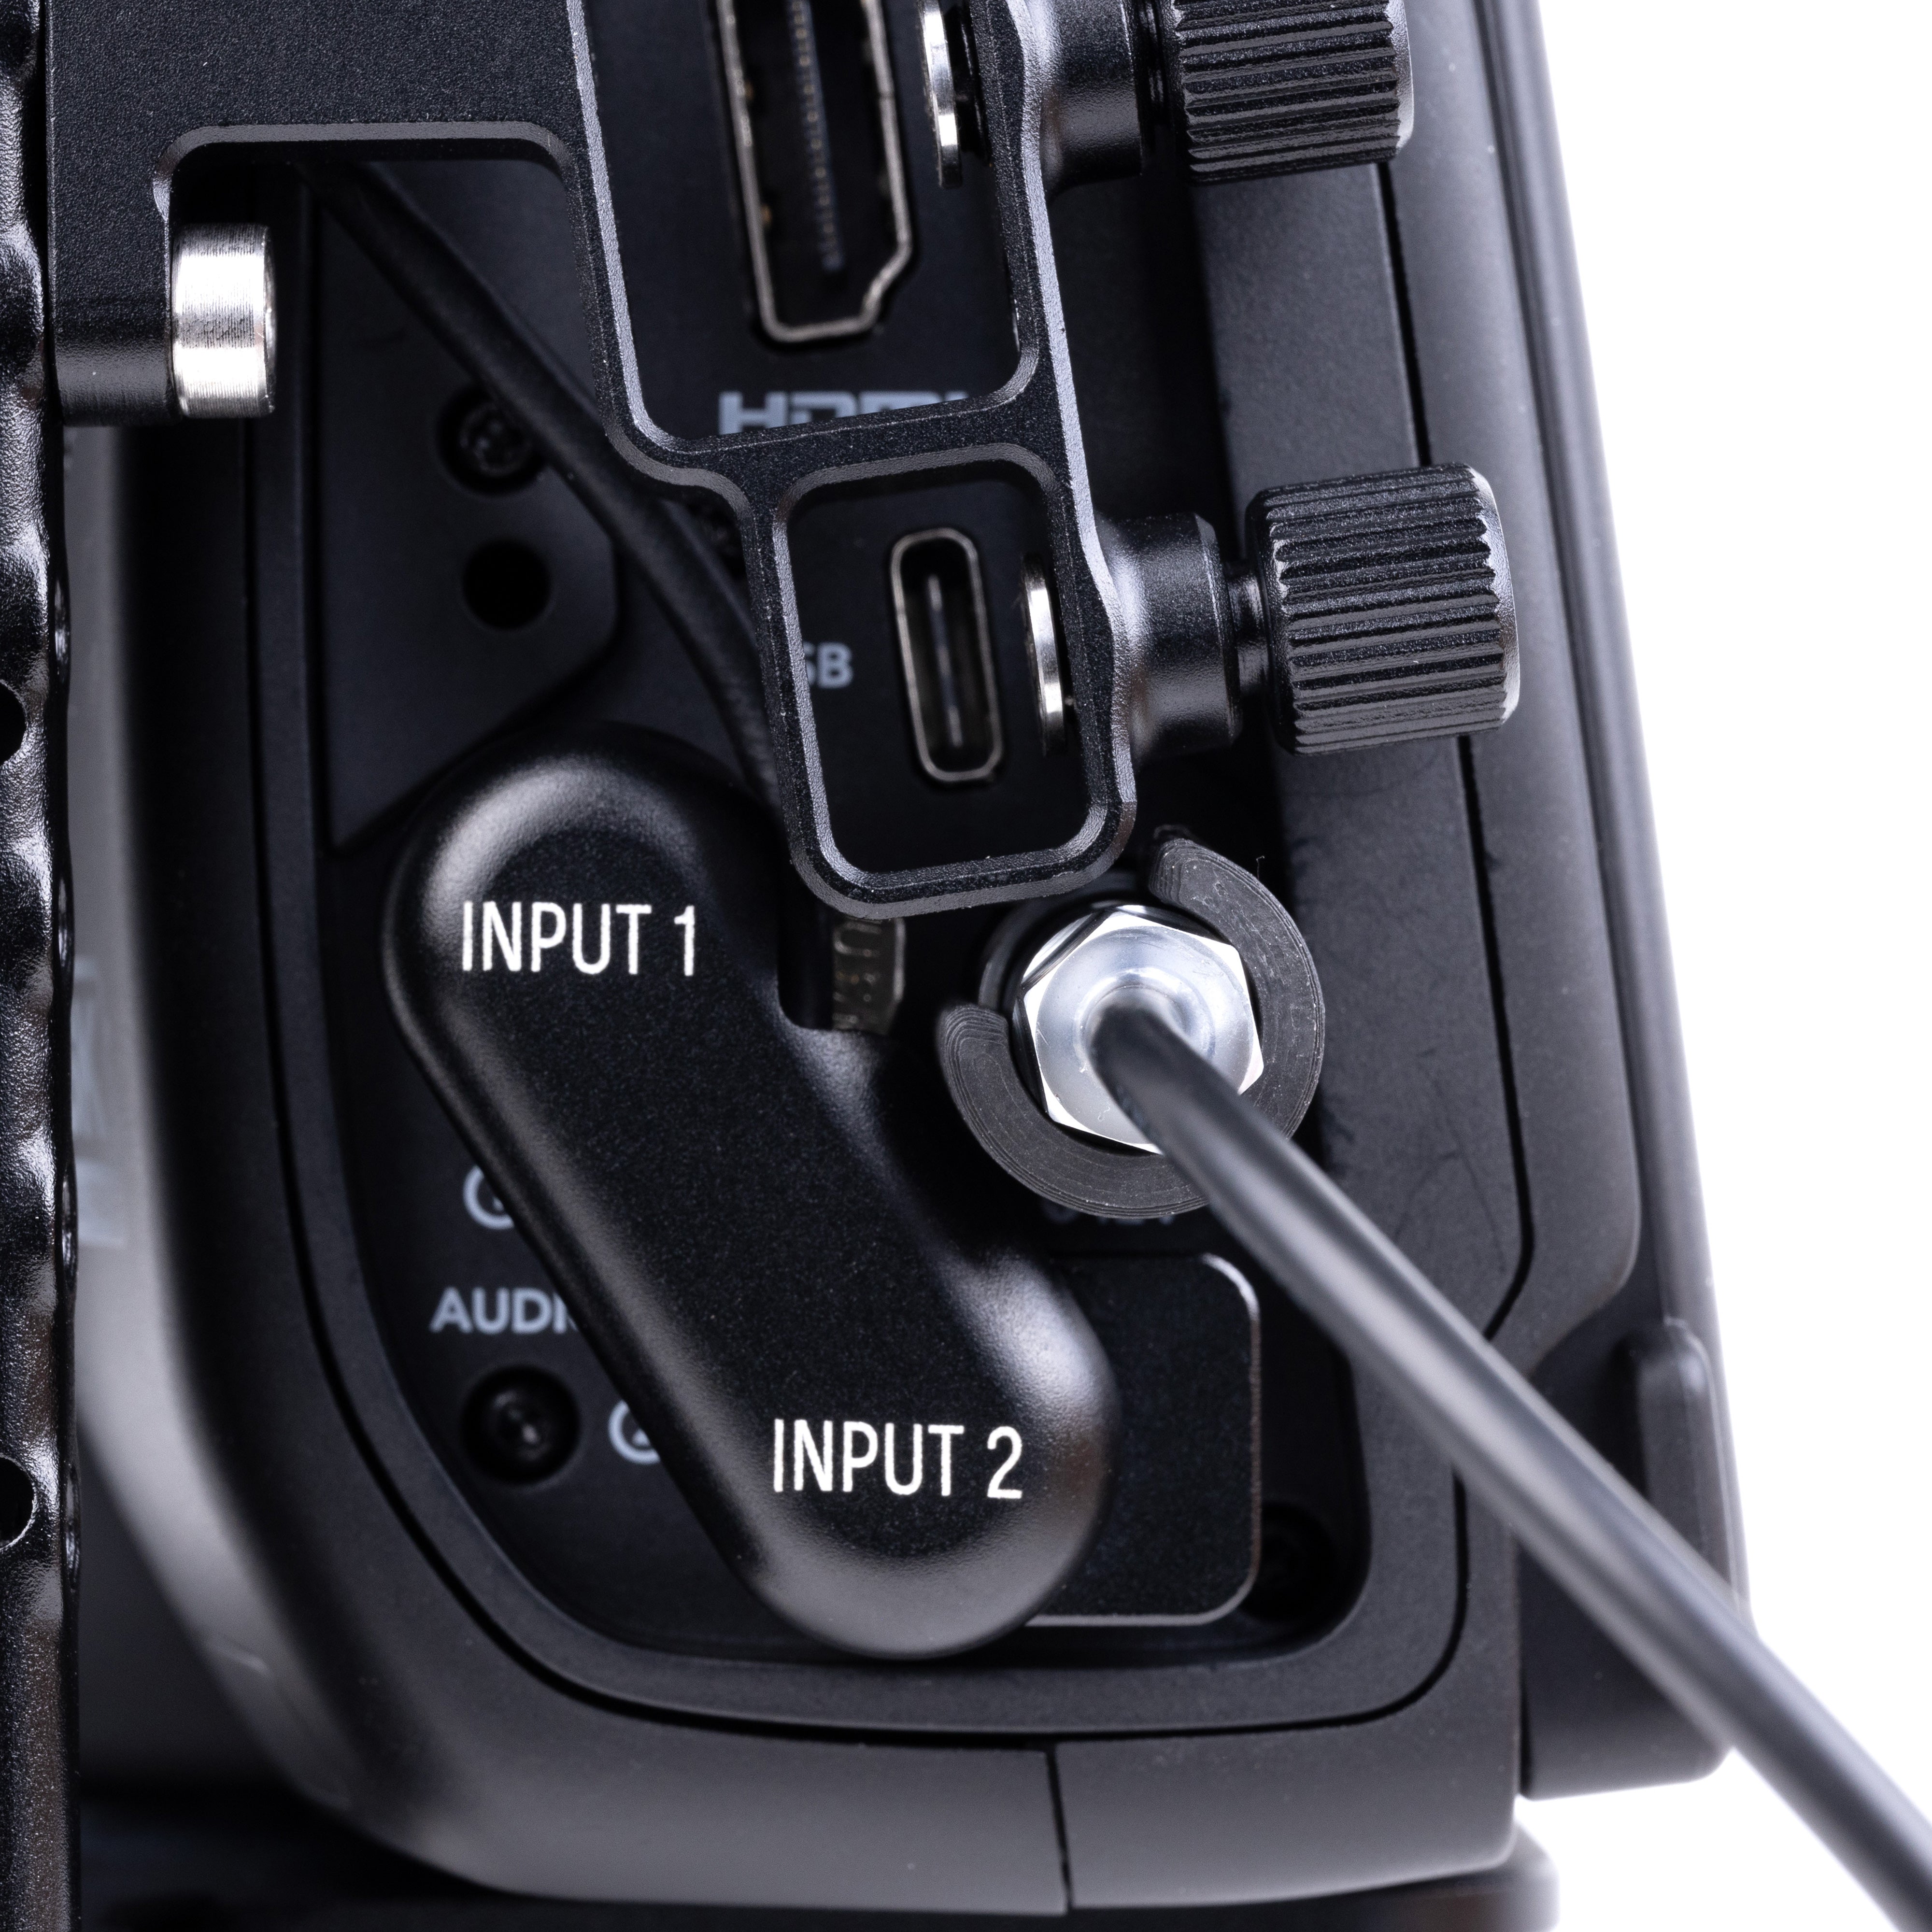 Power Grab for Blackmagic 2-pin Weipu connector